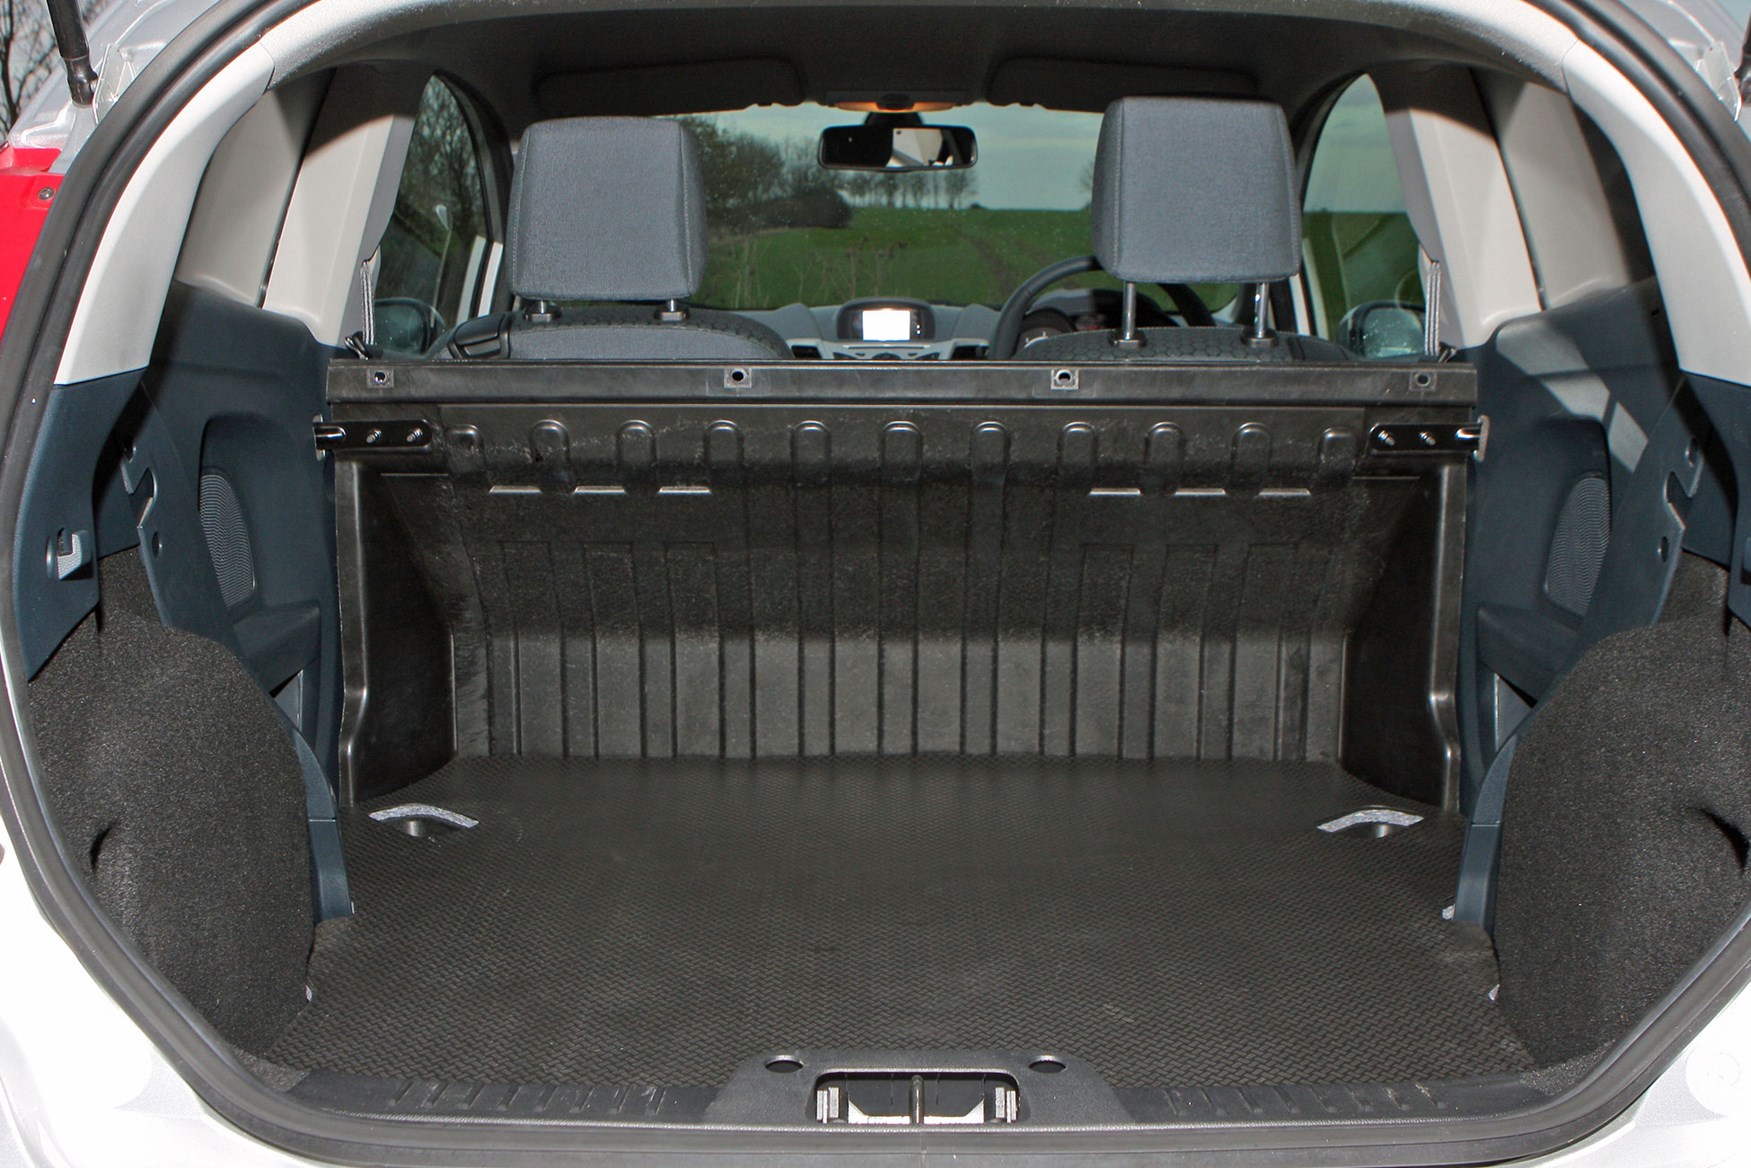 Ford Fiesta dimensions, boot space and electrification